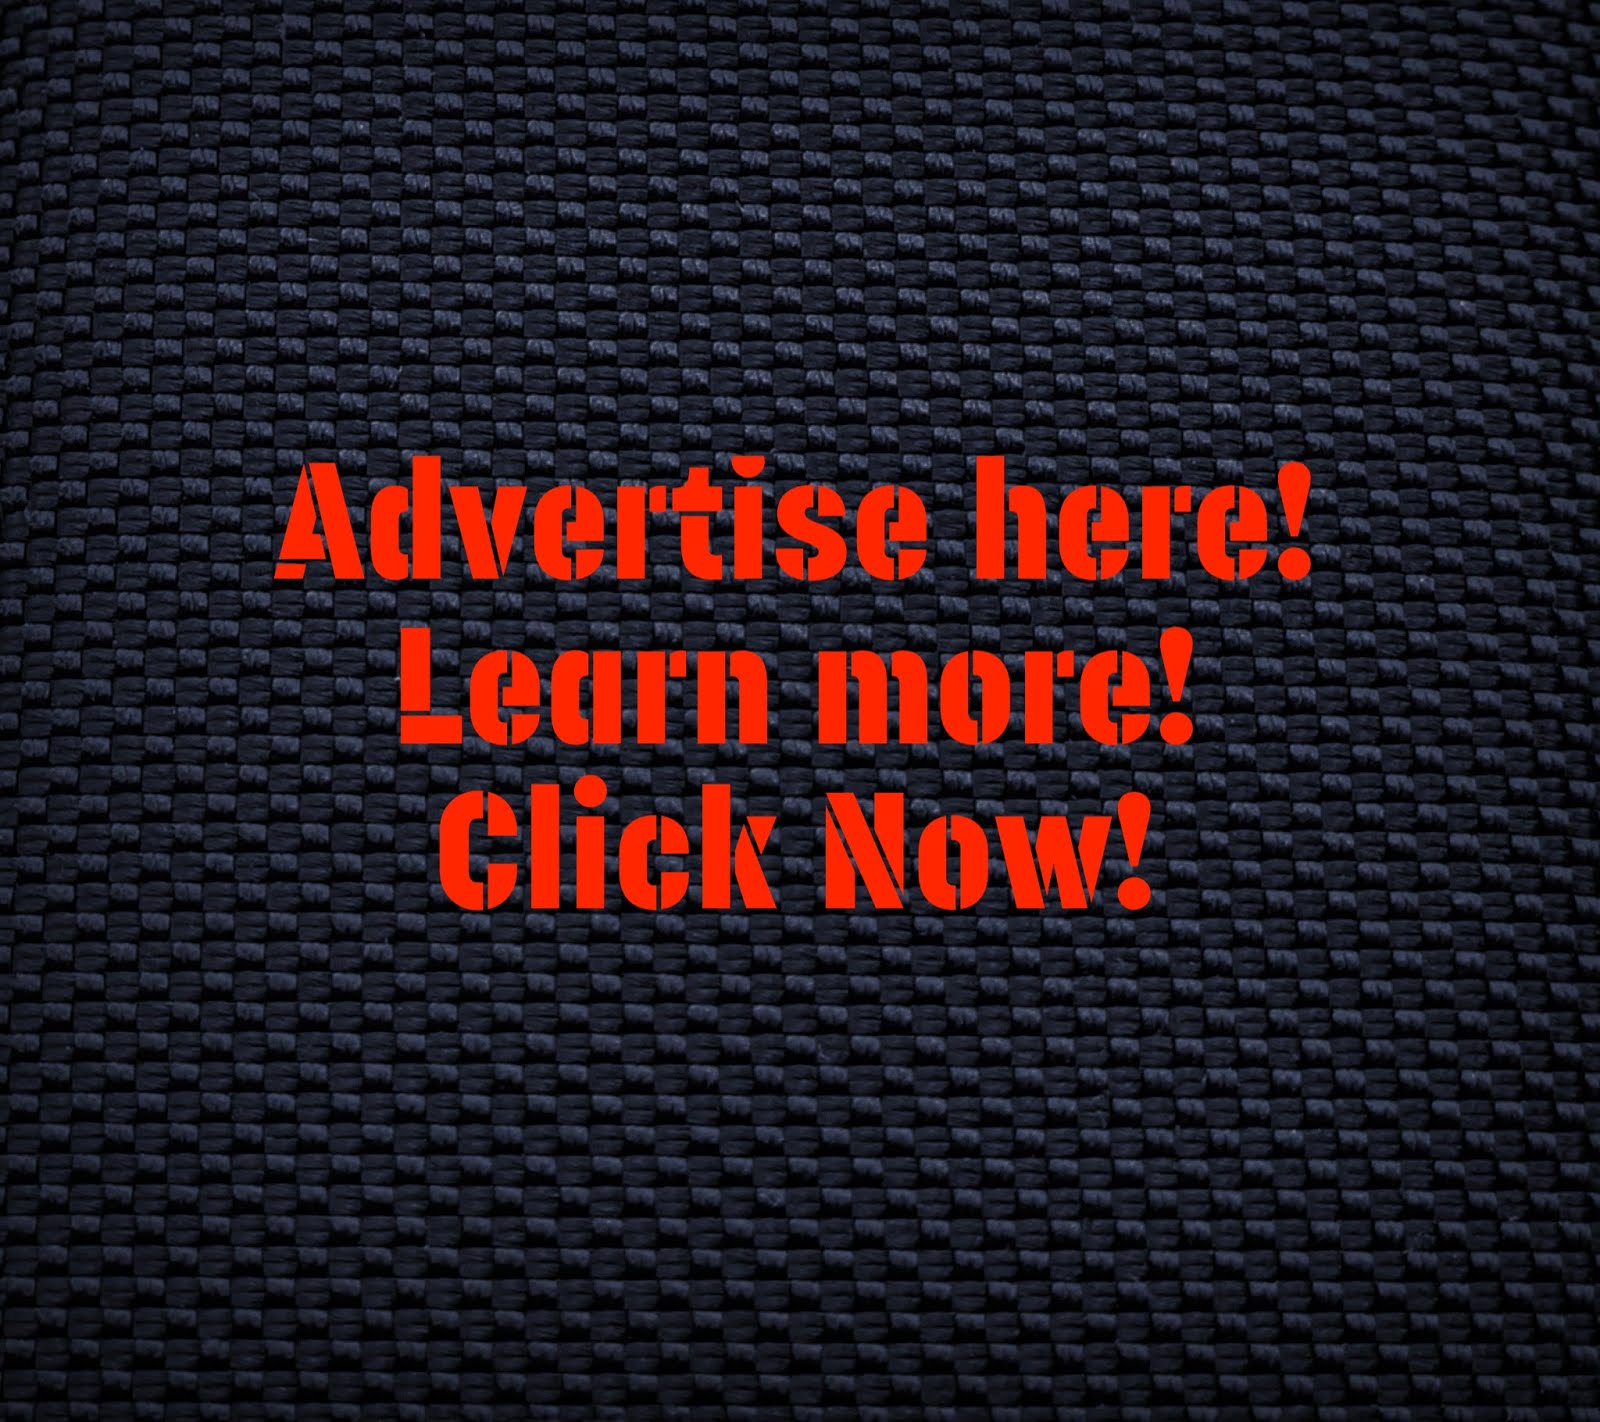 ADVERTISE HERE